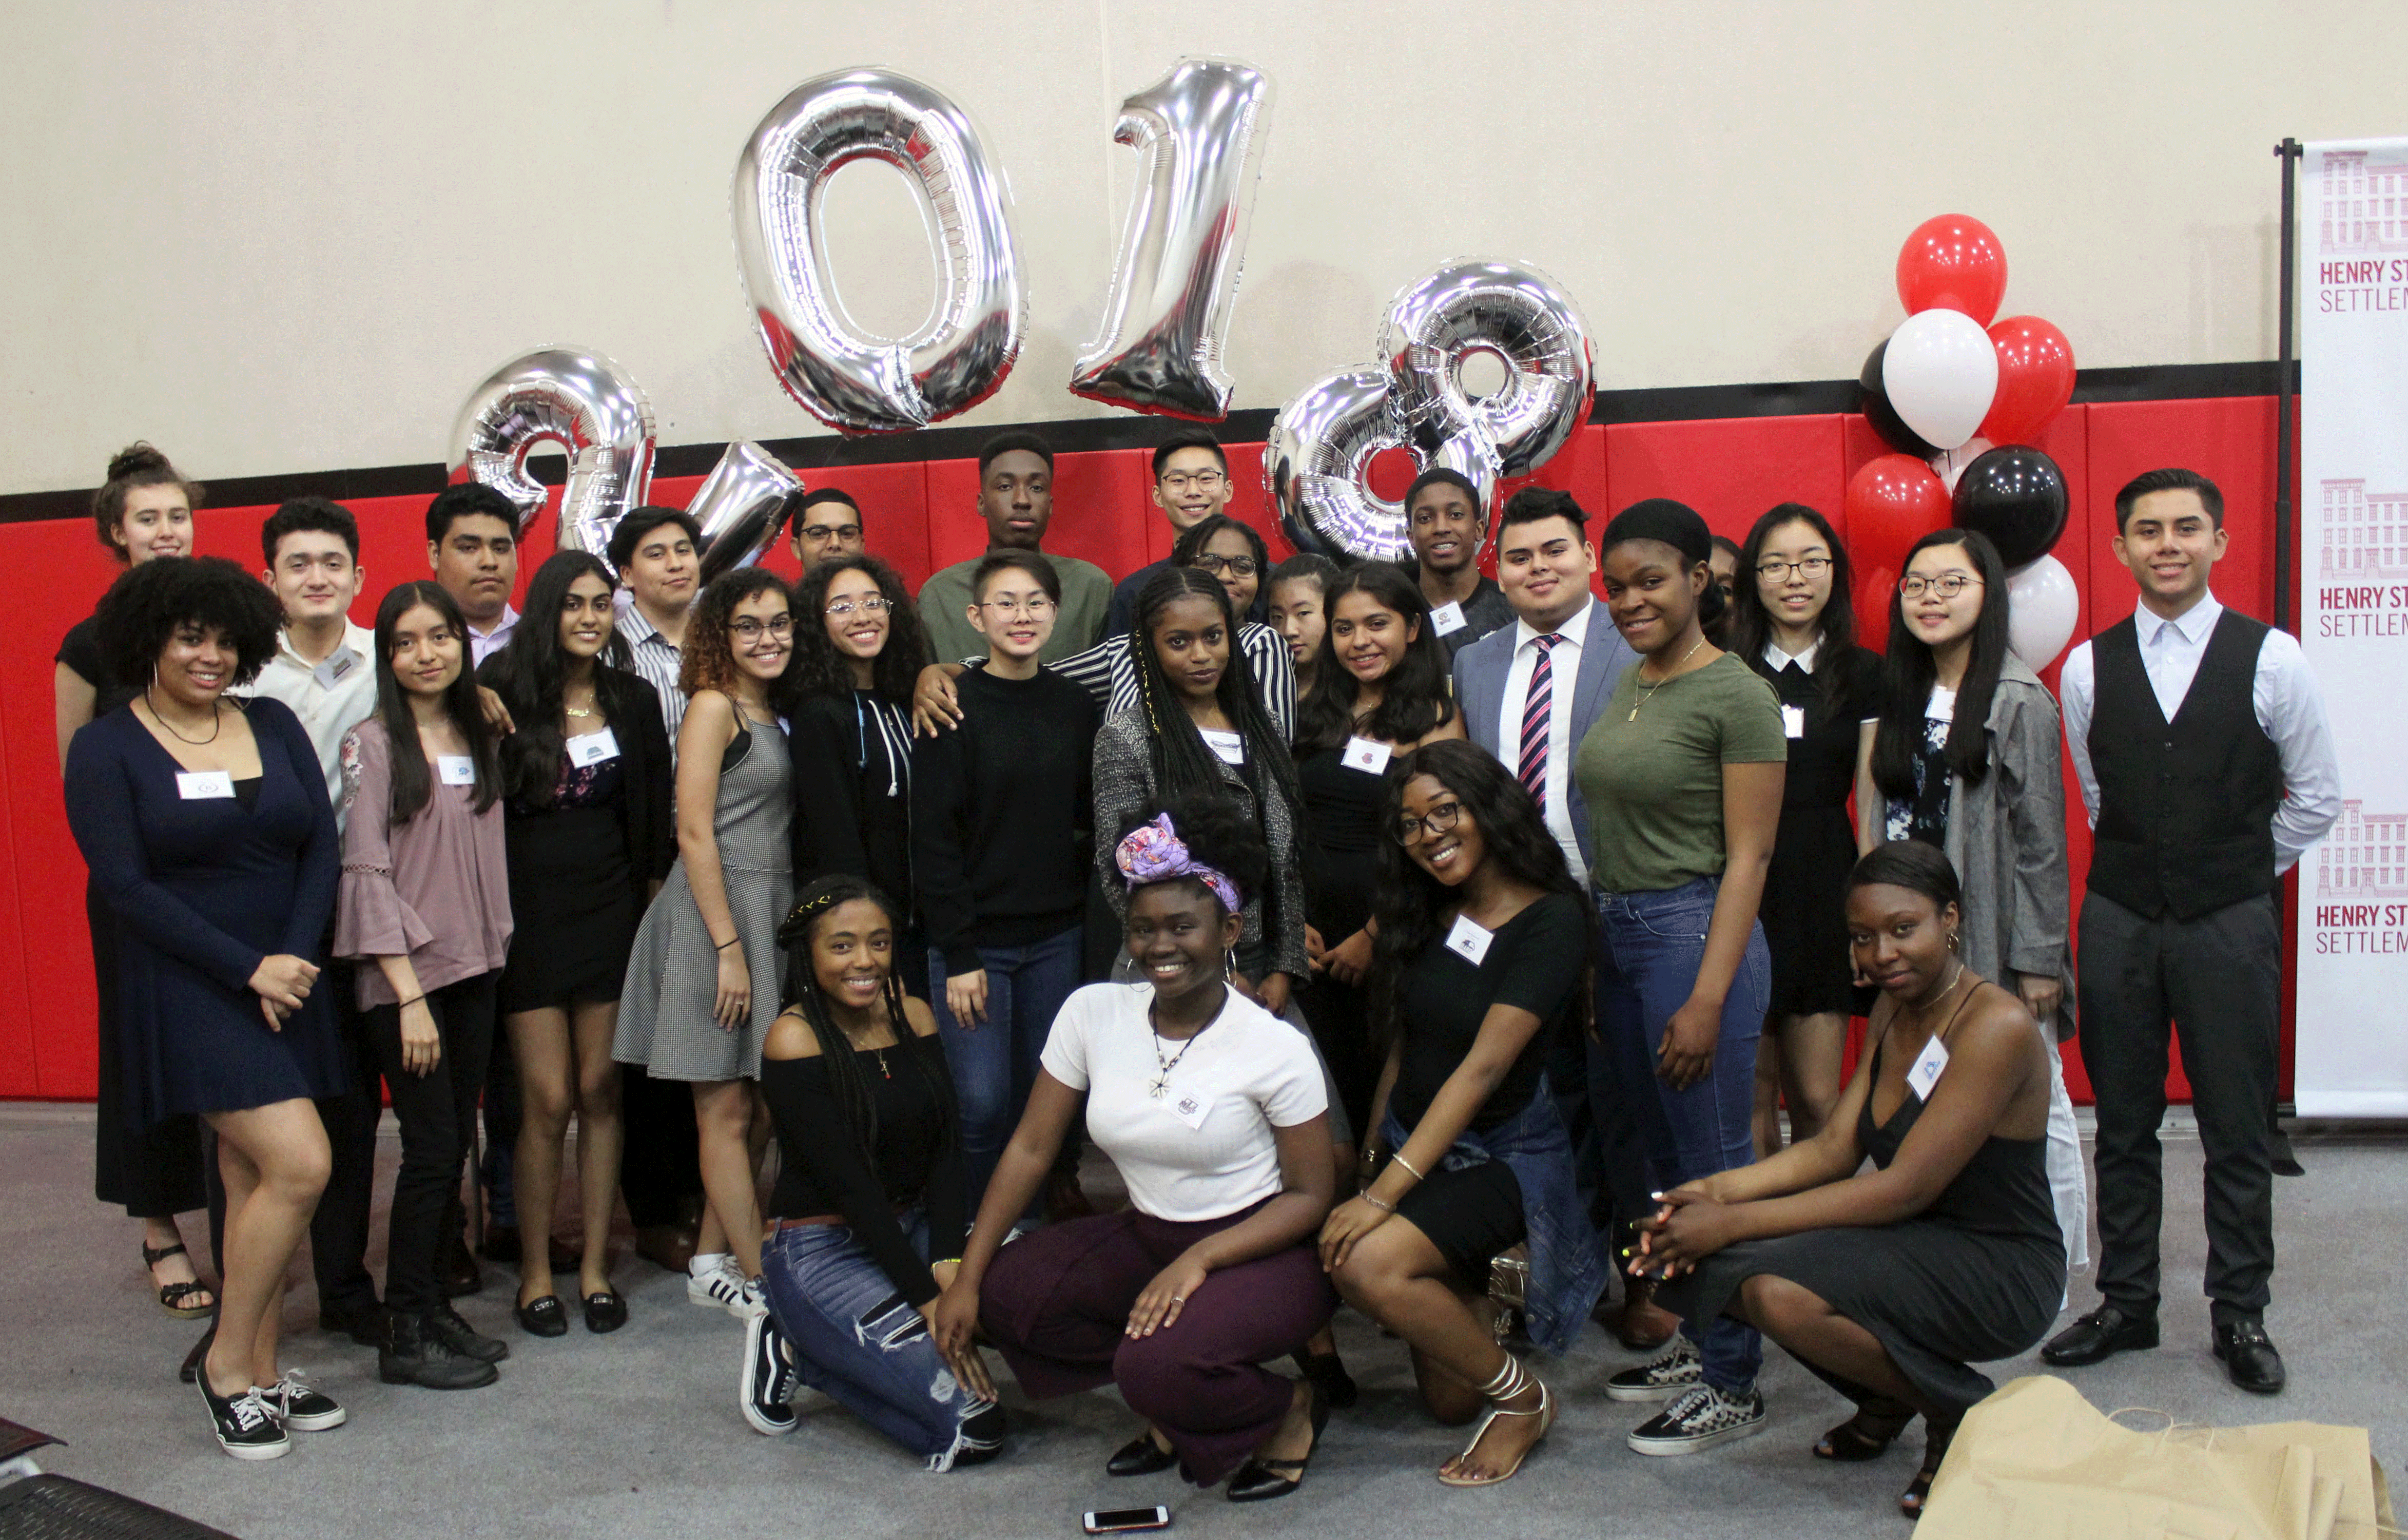 Expanded Horizons youth smile for camera with '2018' balloons